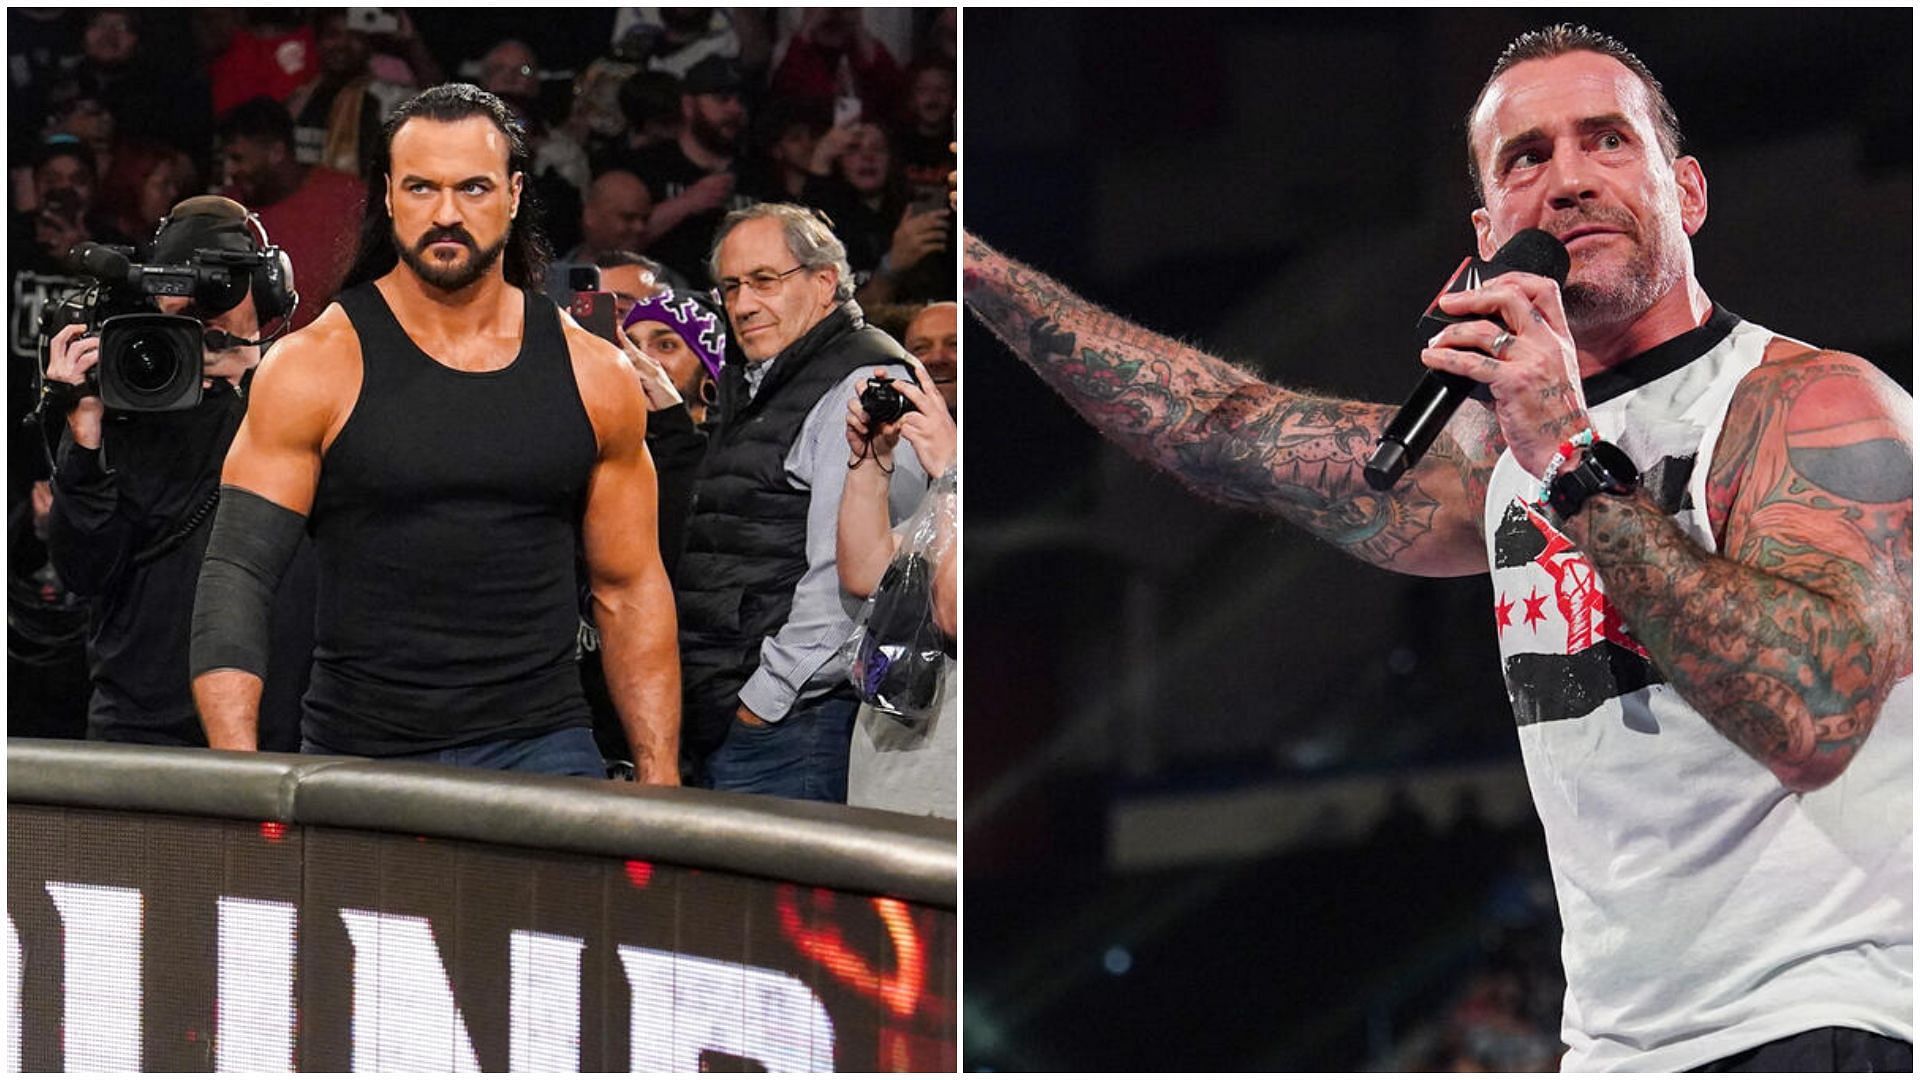 Drew McIntyre (left), and CM Punk (right).